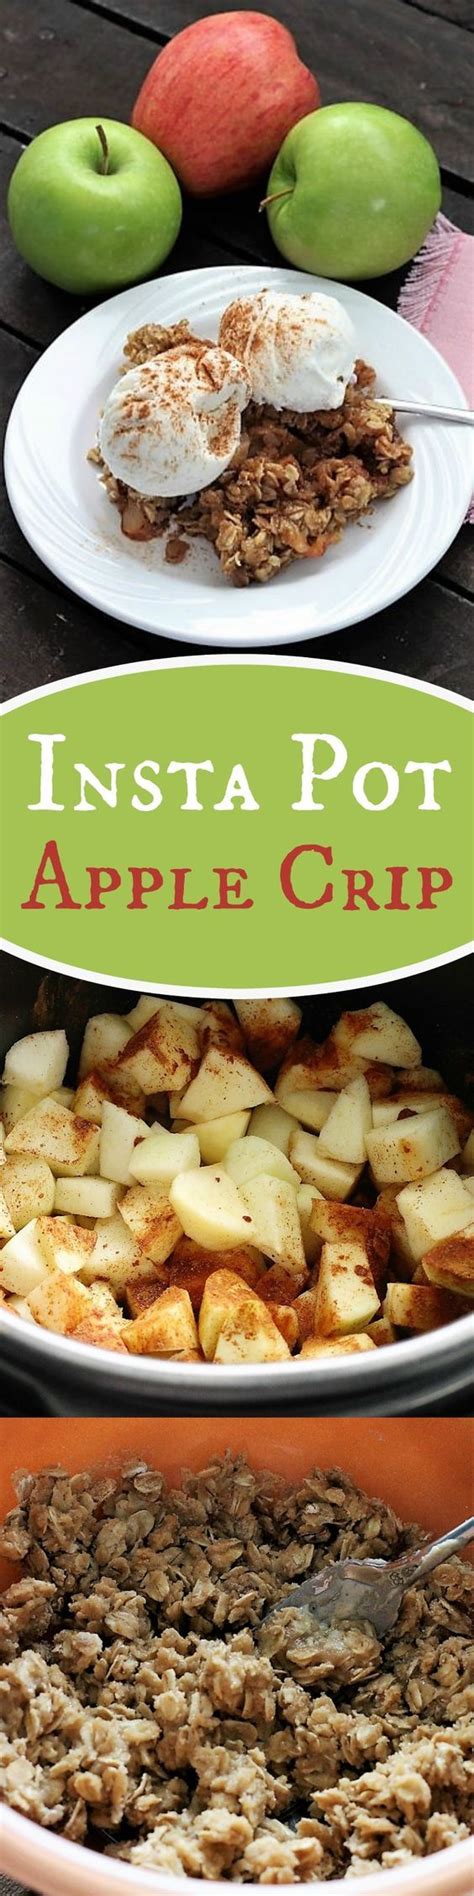 Press the pressure cook button and set to high, then pressure cook for 1 minute. Insta Pot Apple Crisp, Recipe Treasures Blog | Instant pot ...